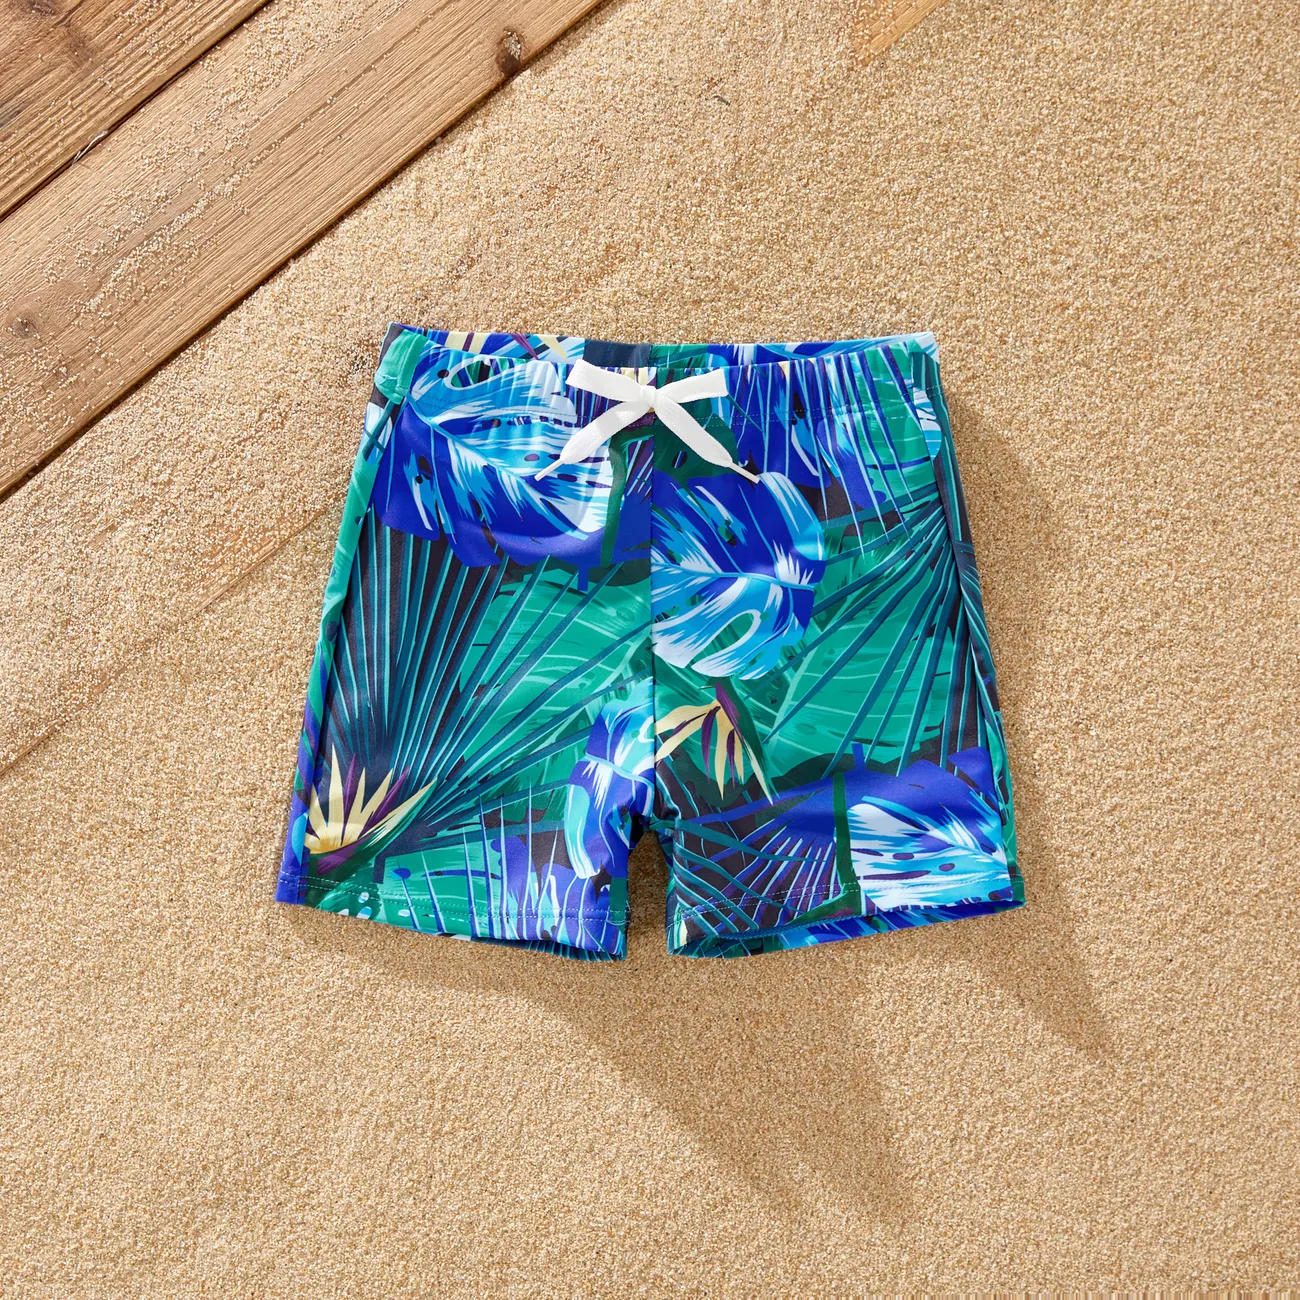 Family Matching Drawstring Swim Trunks or Crisscross Ruched One-Piece Strap Swimsuit Blue big image 1